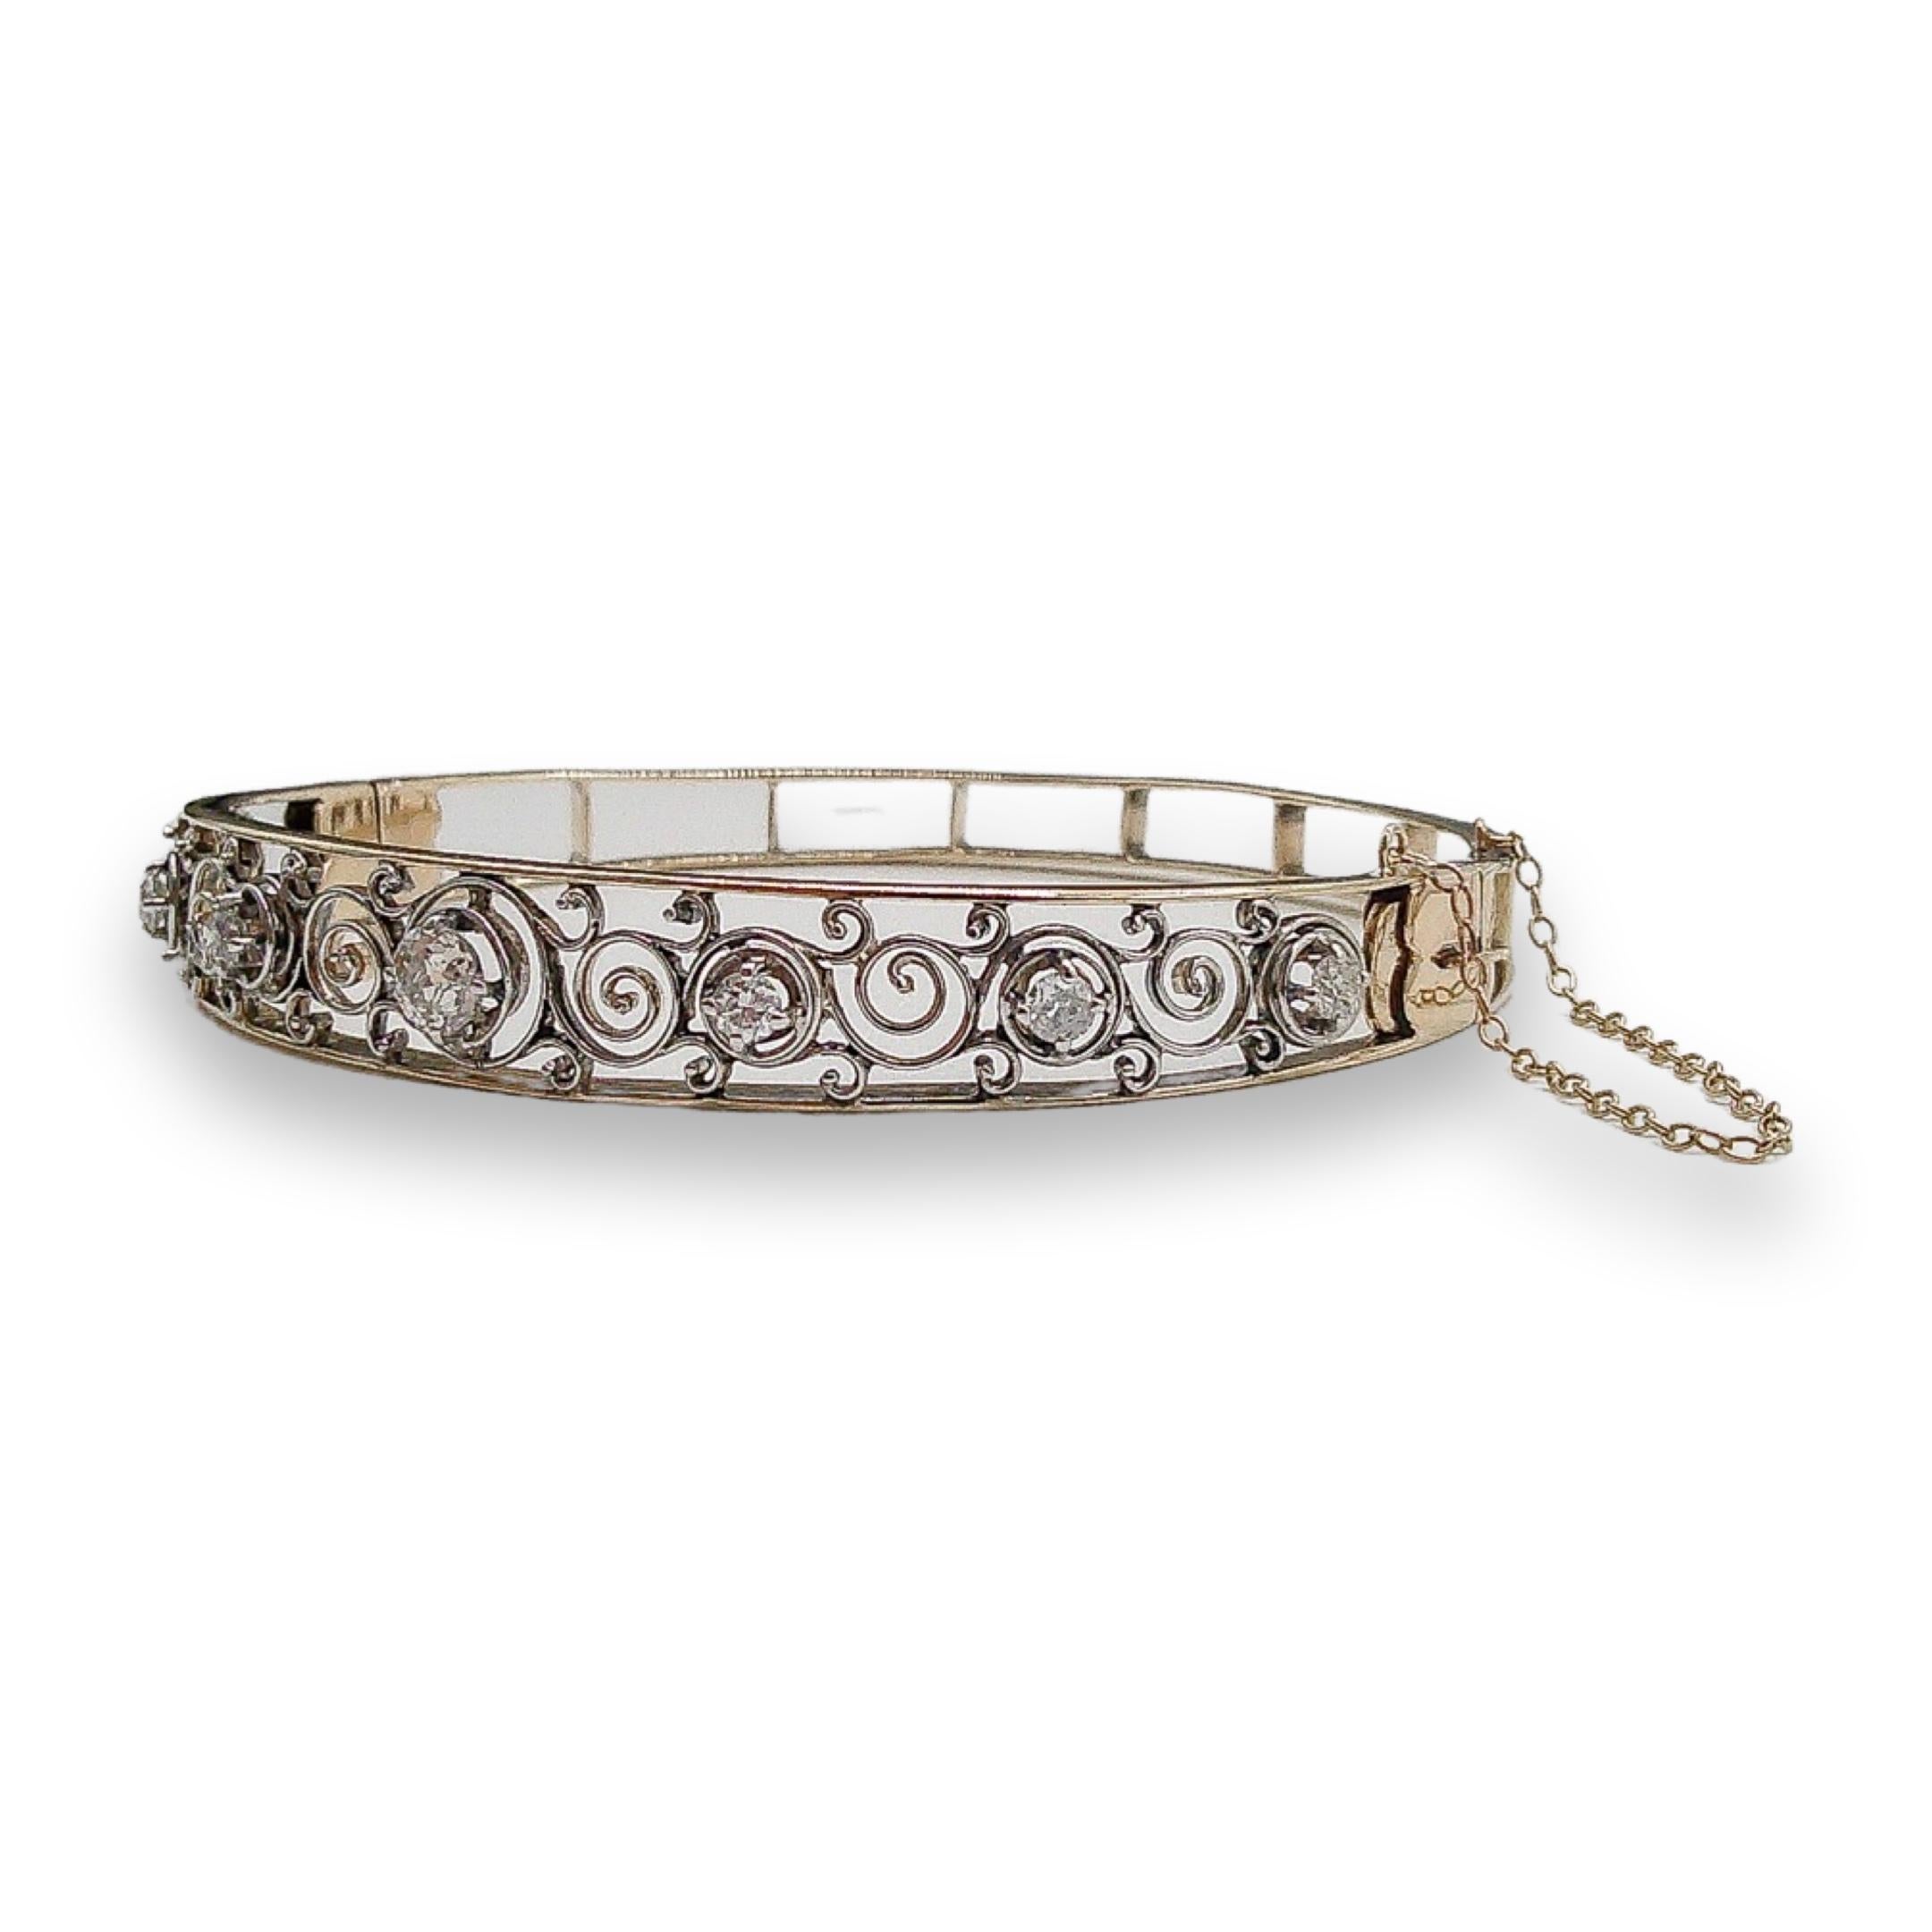 This stunning antique bangle was handcrafted sometime during the Art Deco design period (1920-1940). Crafted with utmost precision, this enchanting bangle combines the richness of 14k gold with a harmonious blend of white and yellow tones, creating